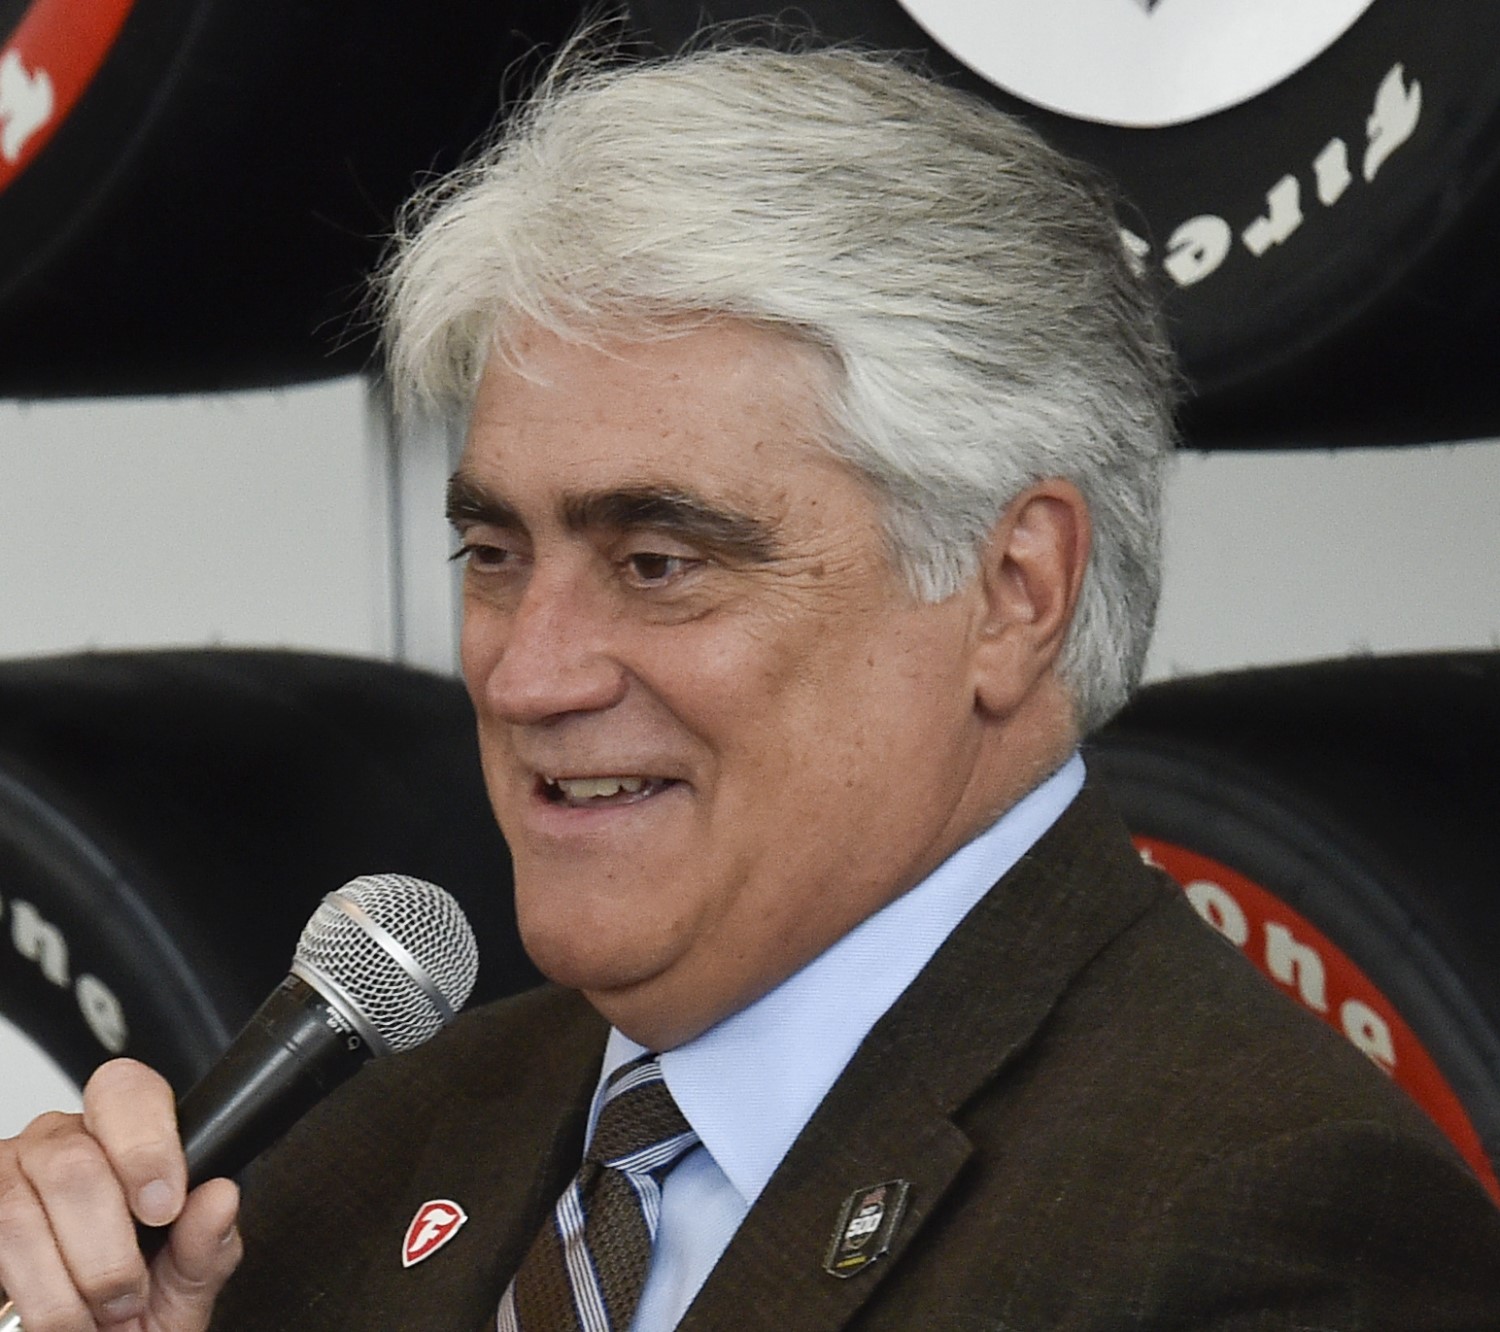 Mark Miles hopes legalized betting in Indiana brings more interest to the Indy 500 and IndyCar